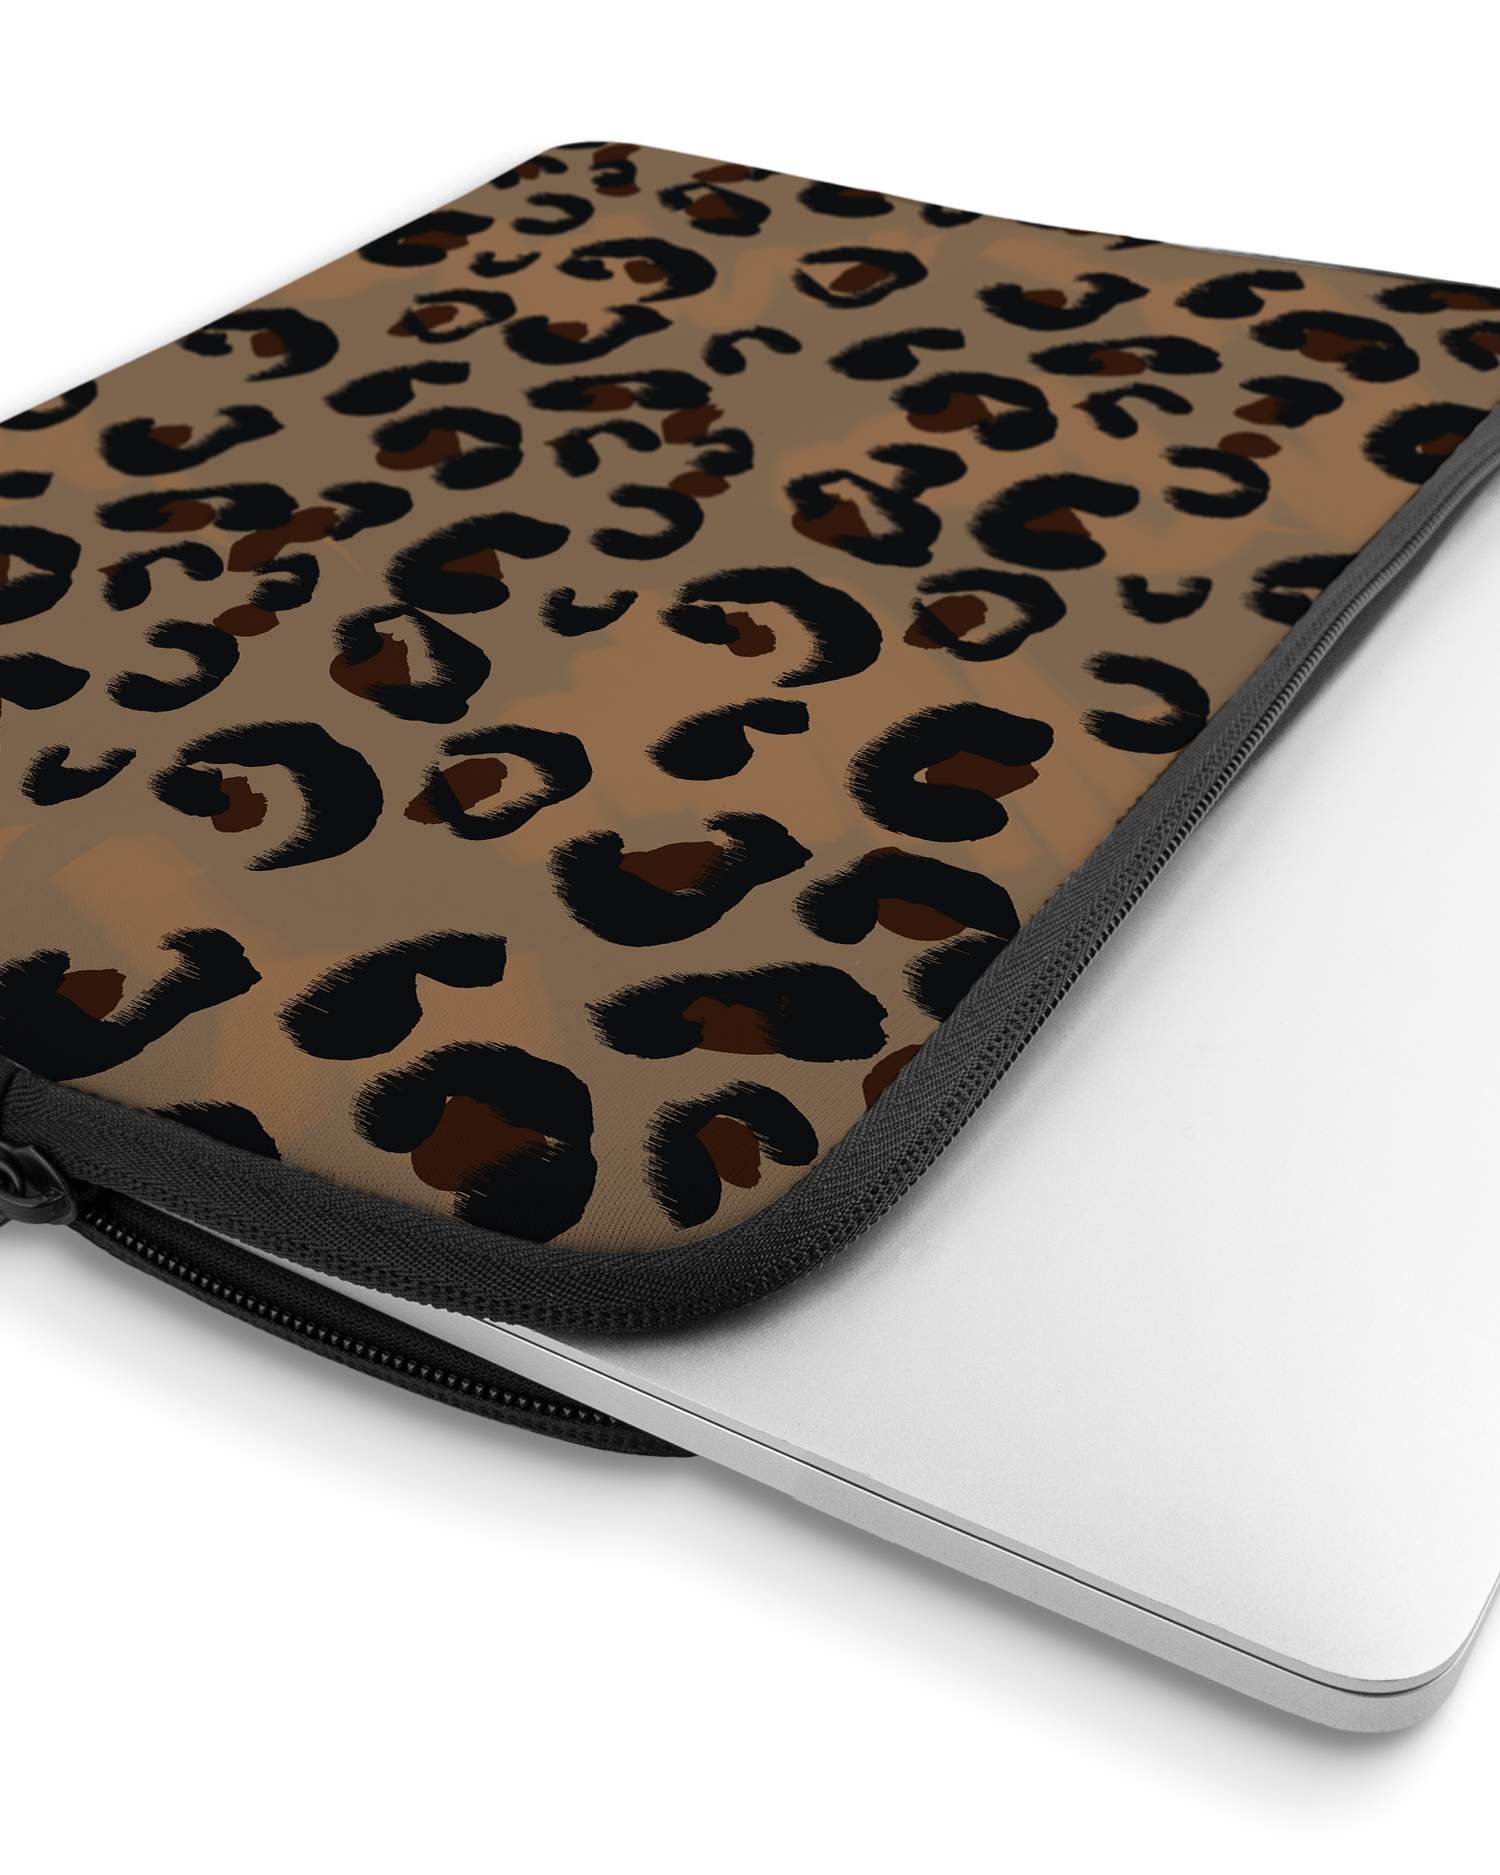 Leopard Repeat Laptop Case 13 inch with device inside